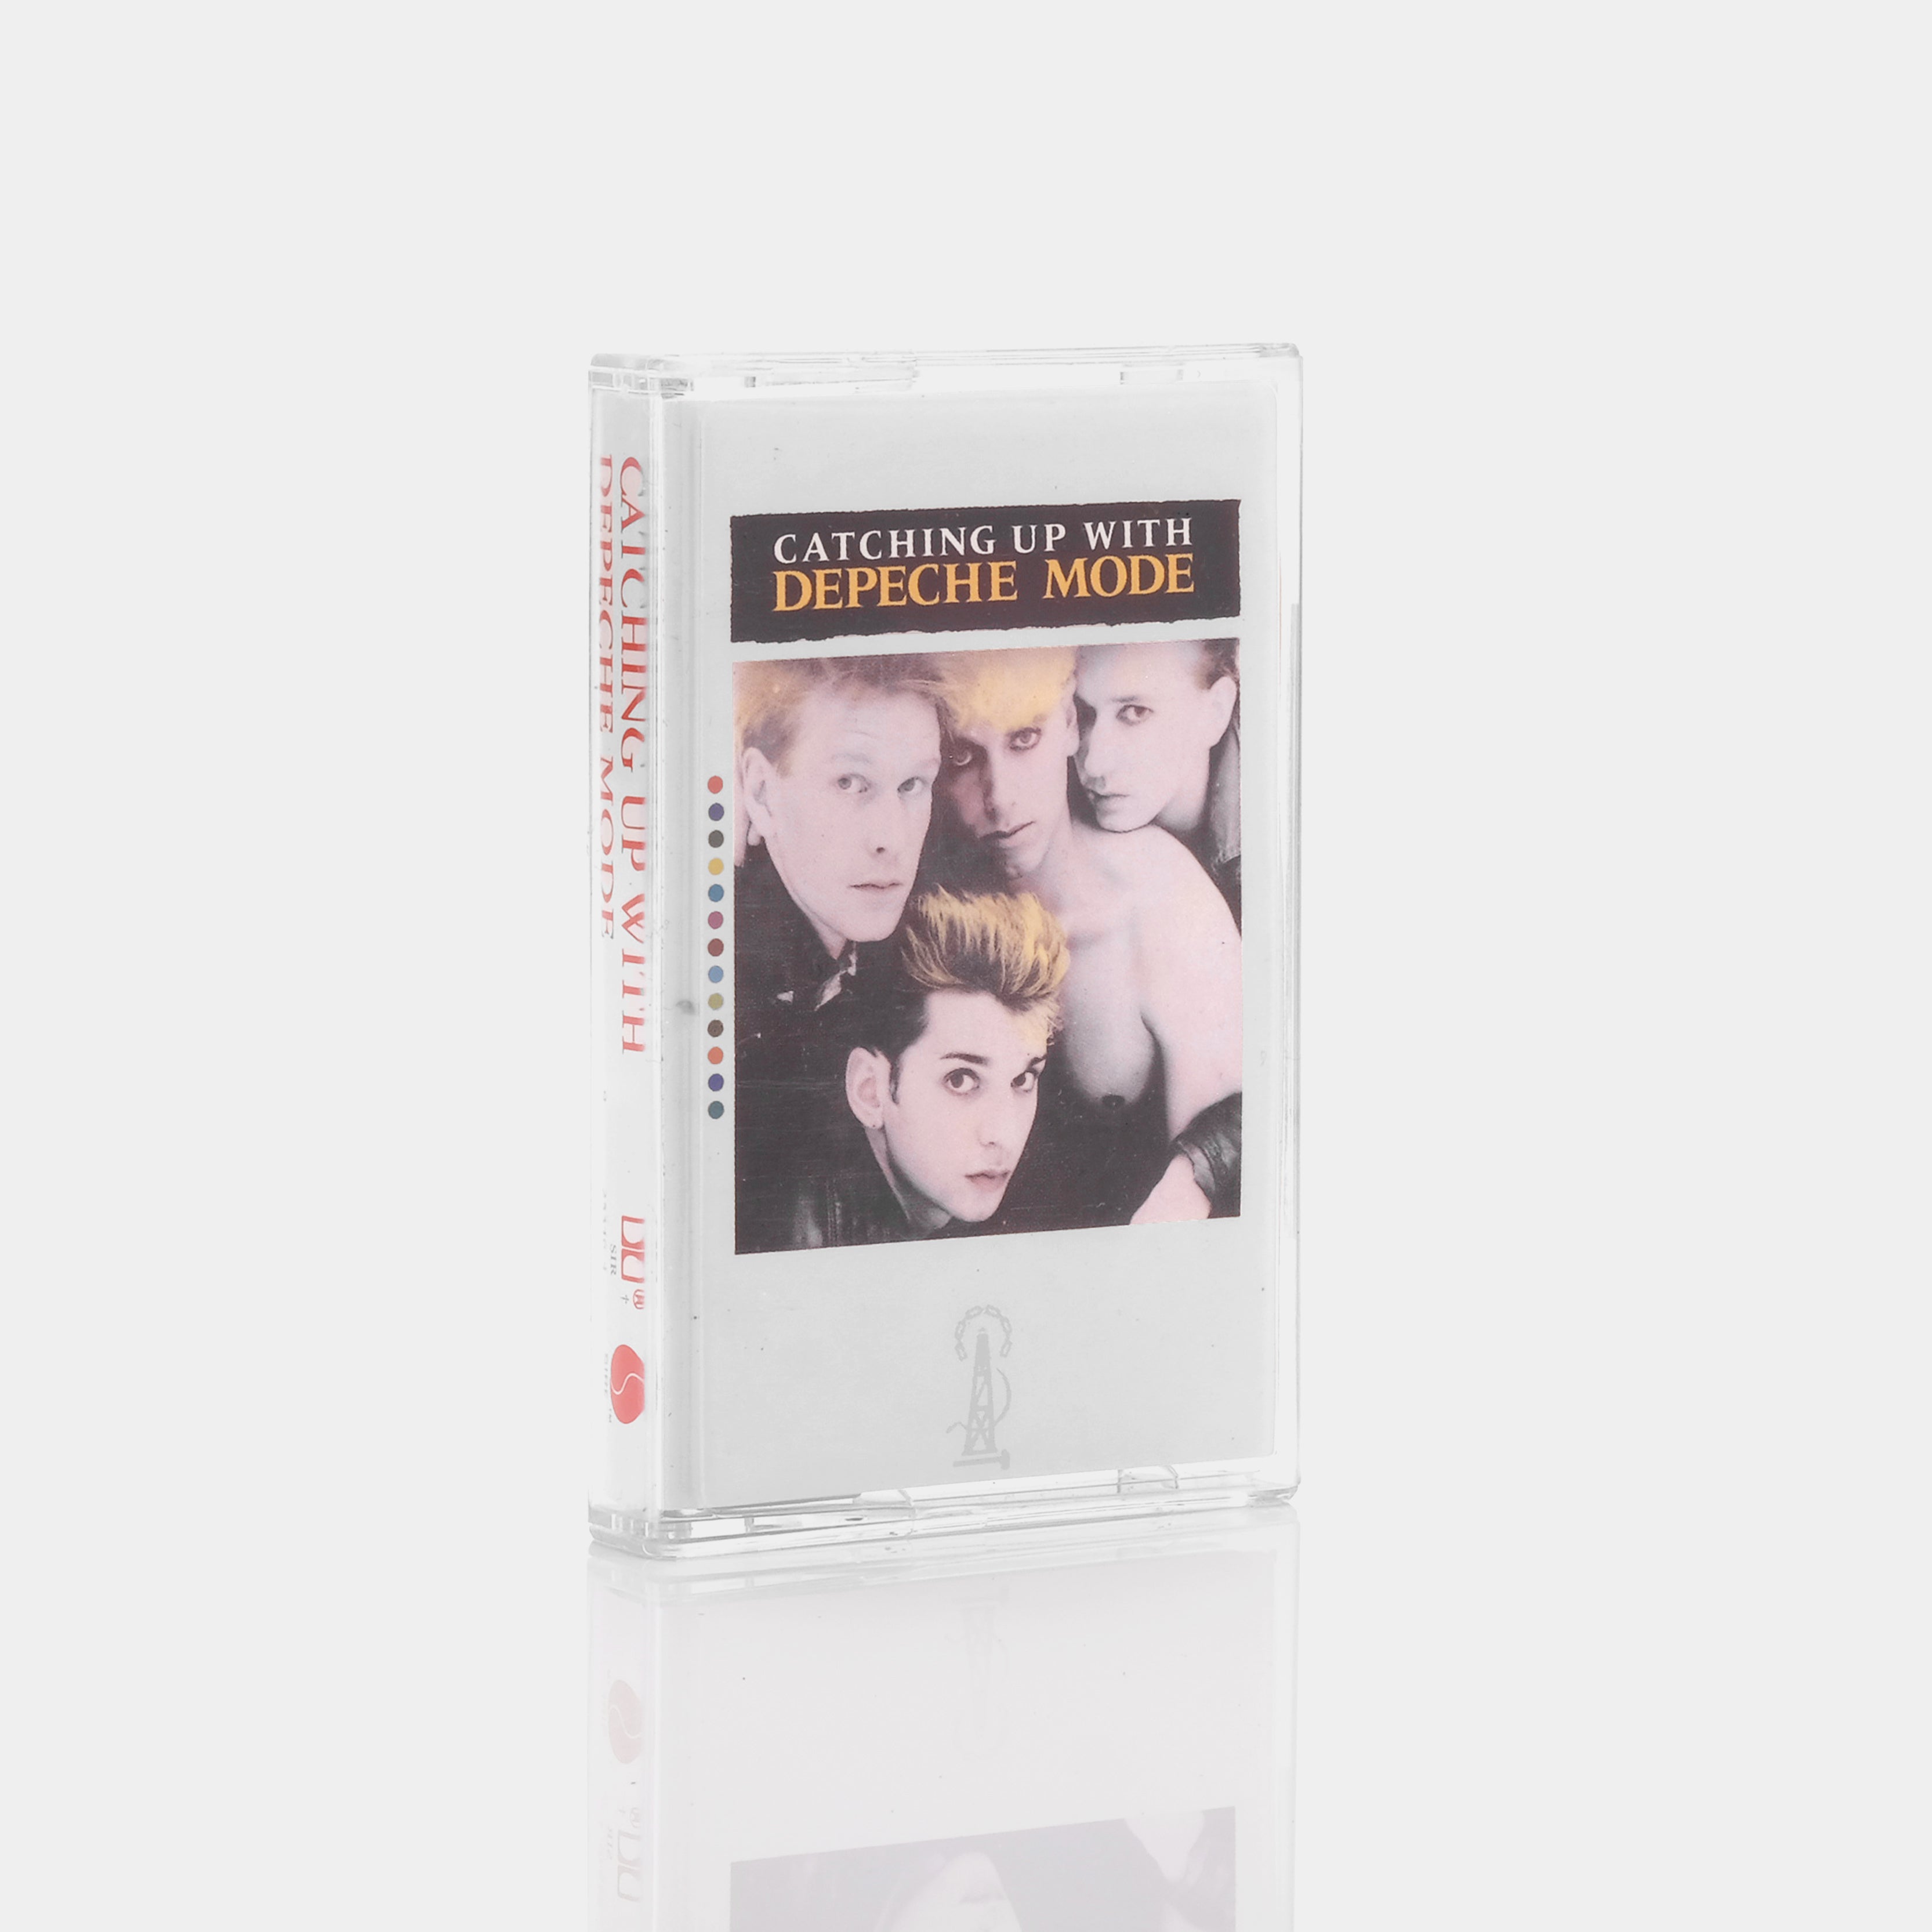 Depeche Mode - Catching Up With Depeche Mode Cassette Tape